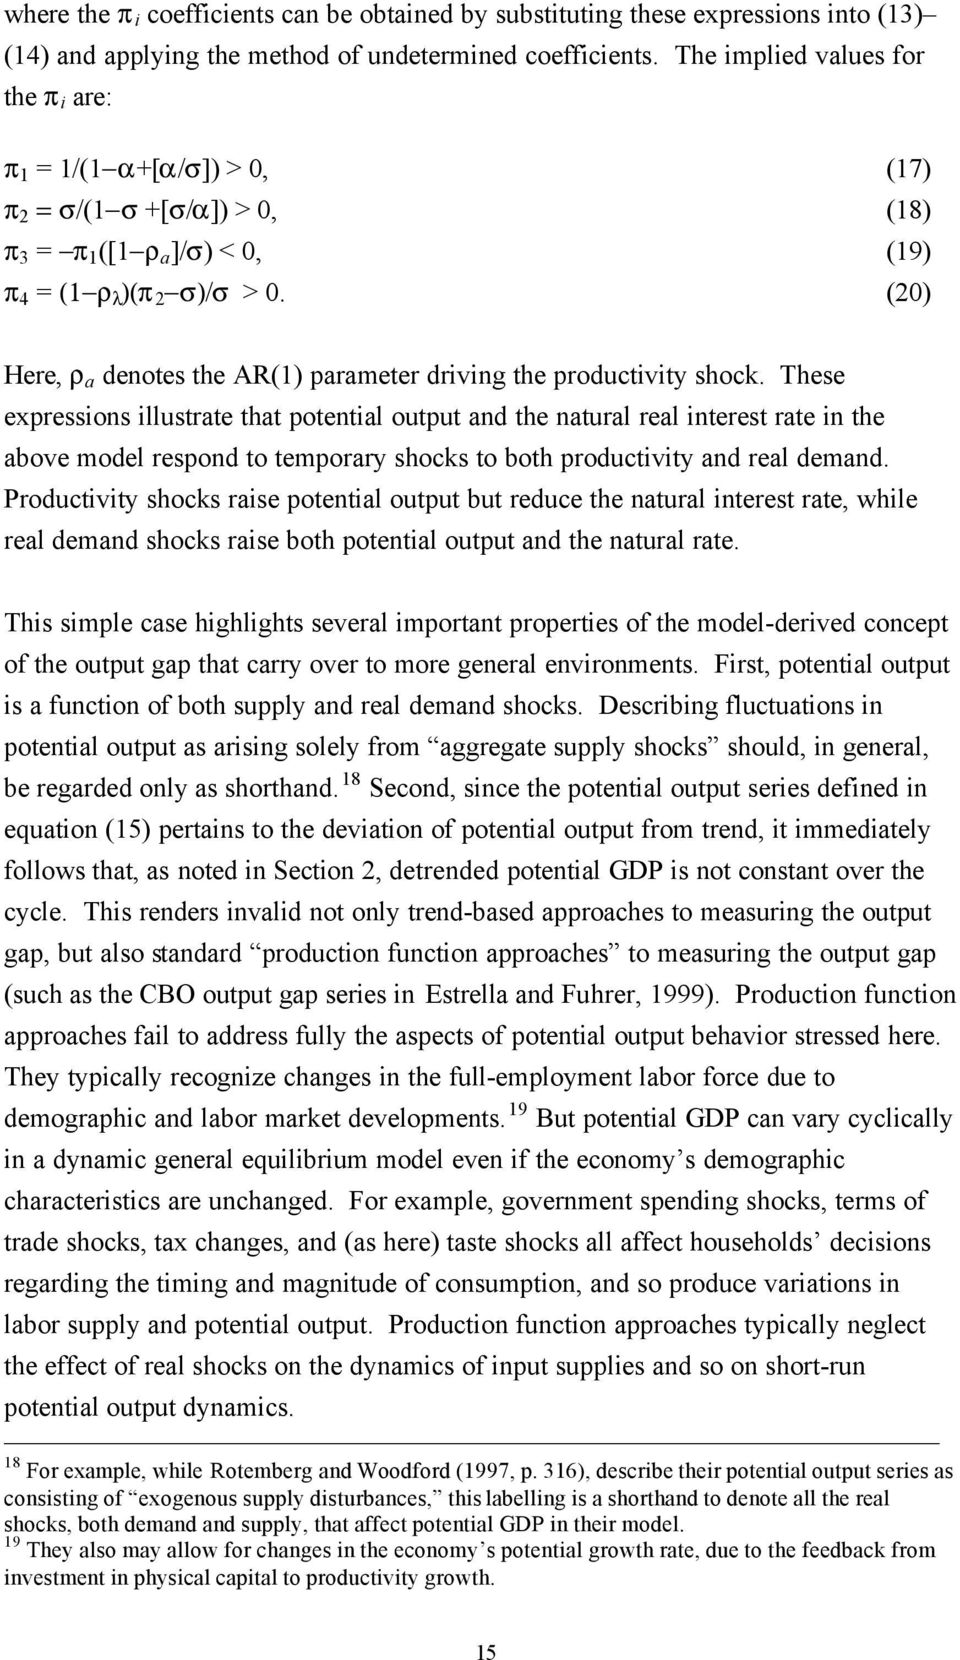 (20) Here, ρ a denotes the AR(1) parameter driving the productivity shock.